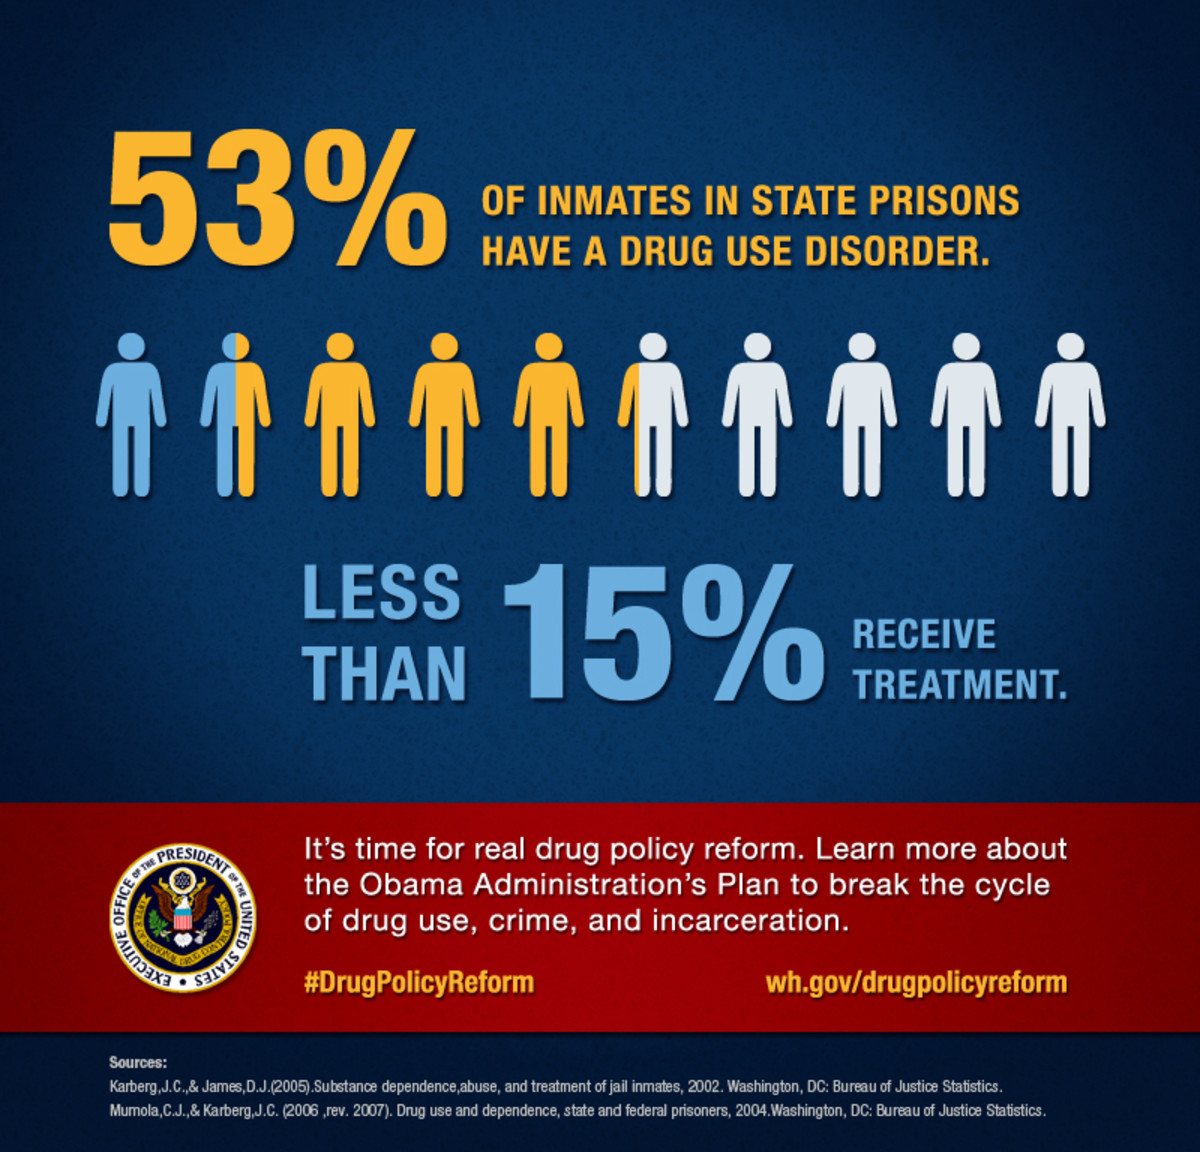 53% of inmates in state prisons have drug use disorders.